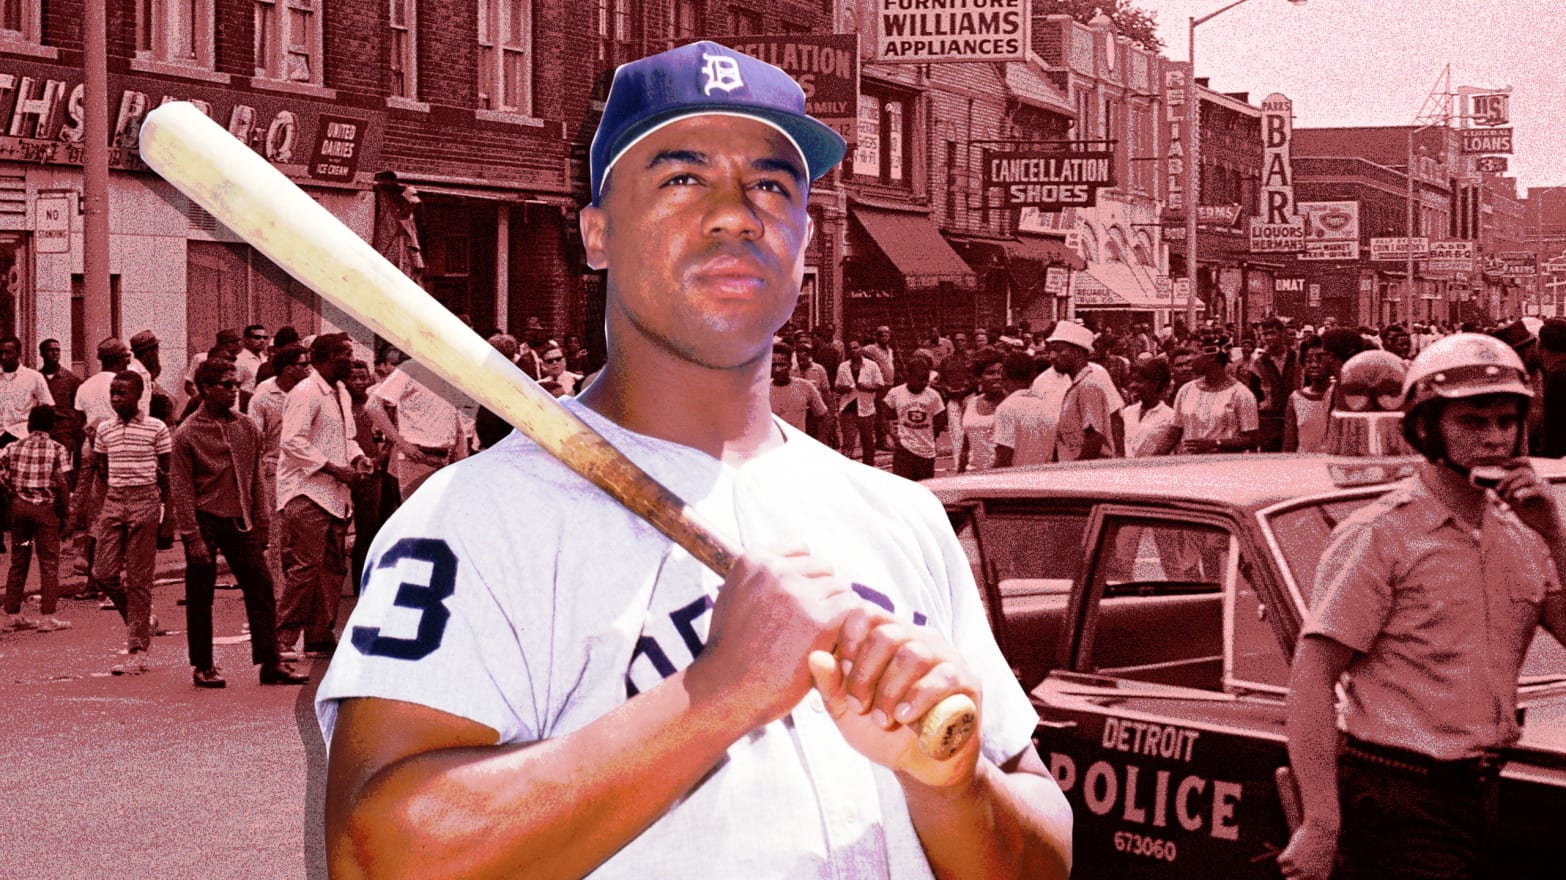 Tigers great Willie Horton gets special day in state